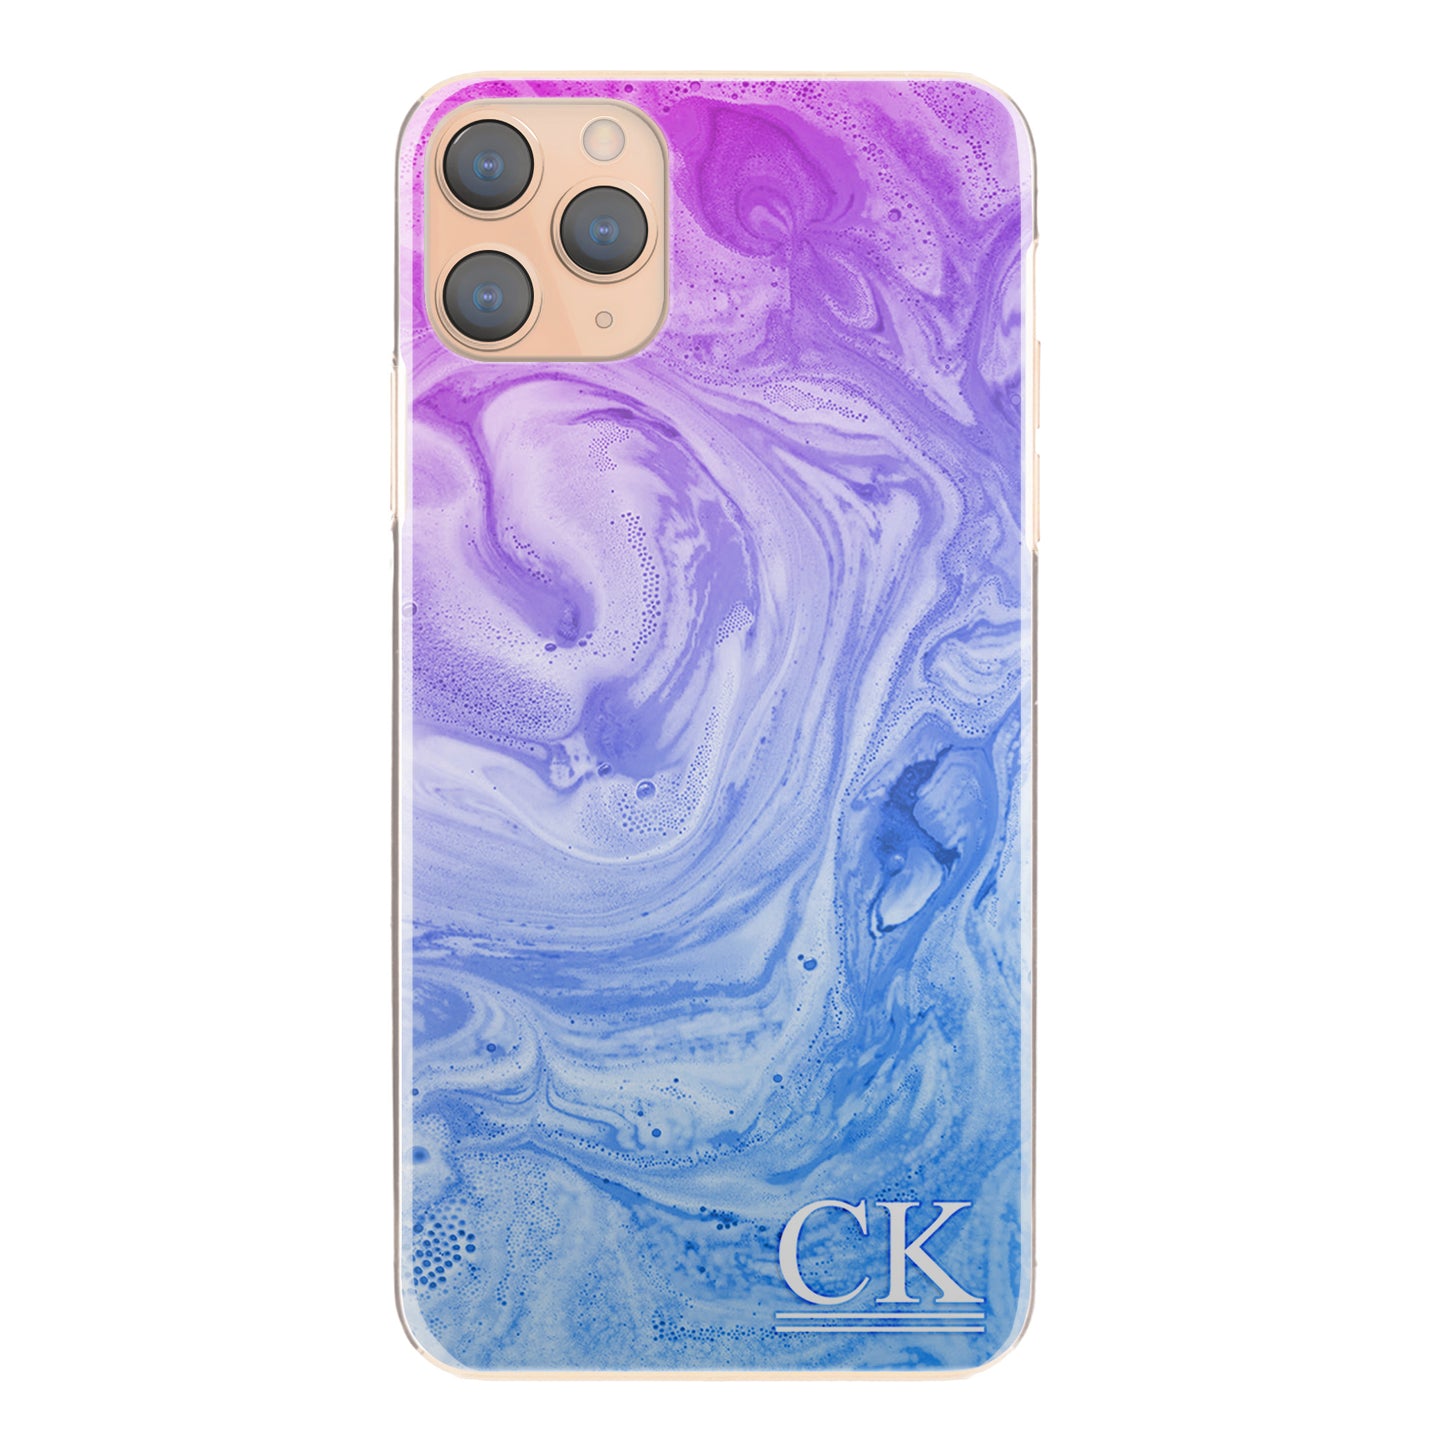 Personalised LG Phone Hard Case with White Initials on Blue Purple Gradient Swirled Marble